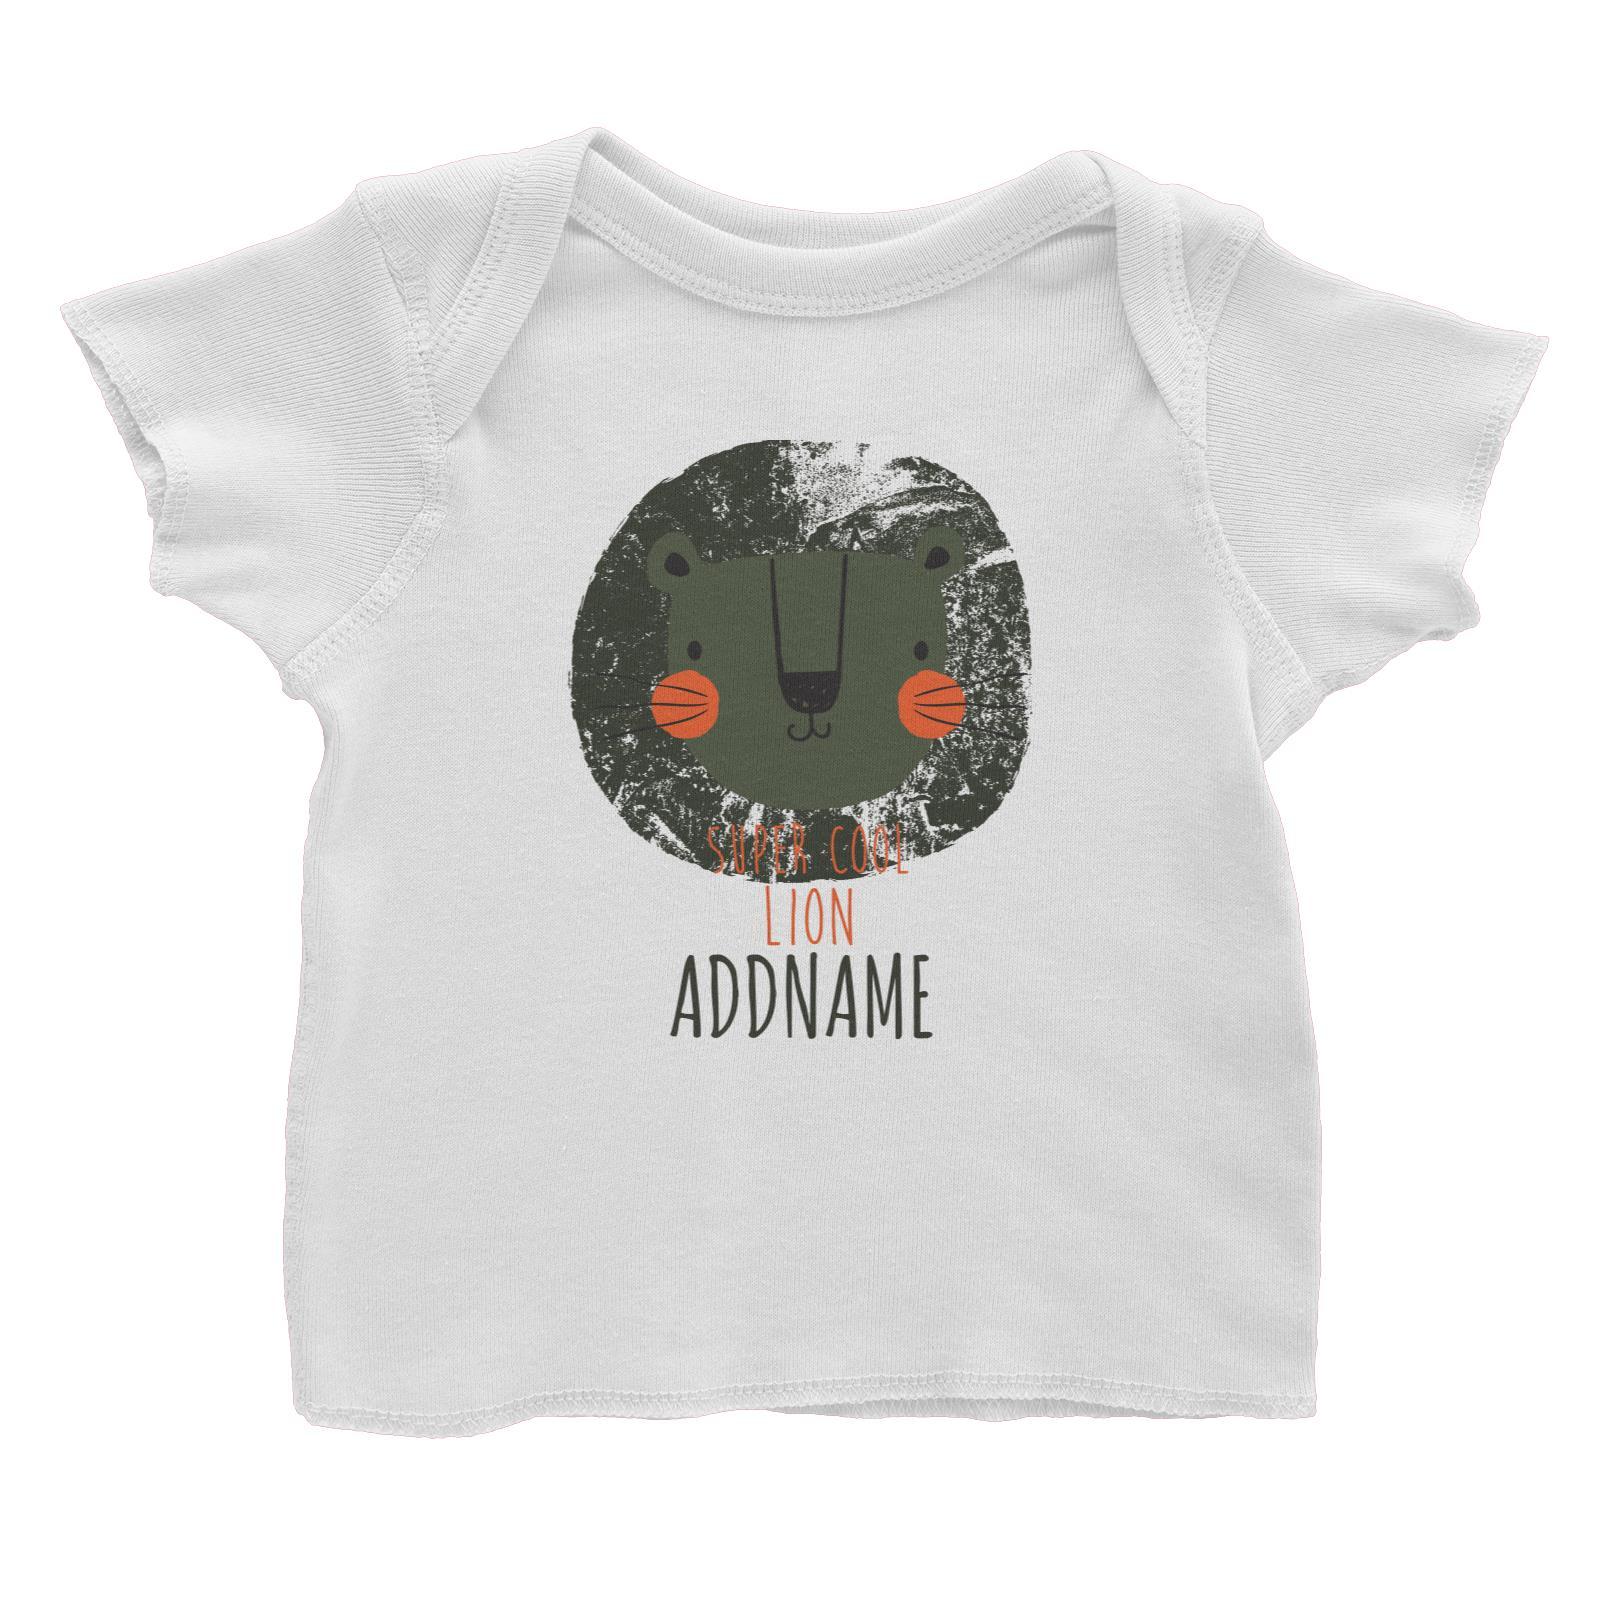 Super Cool Lion Addname Baby T-Shirt